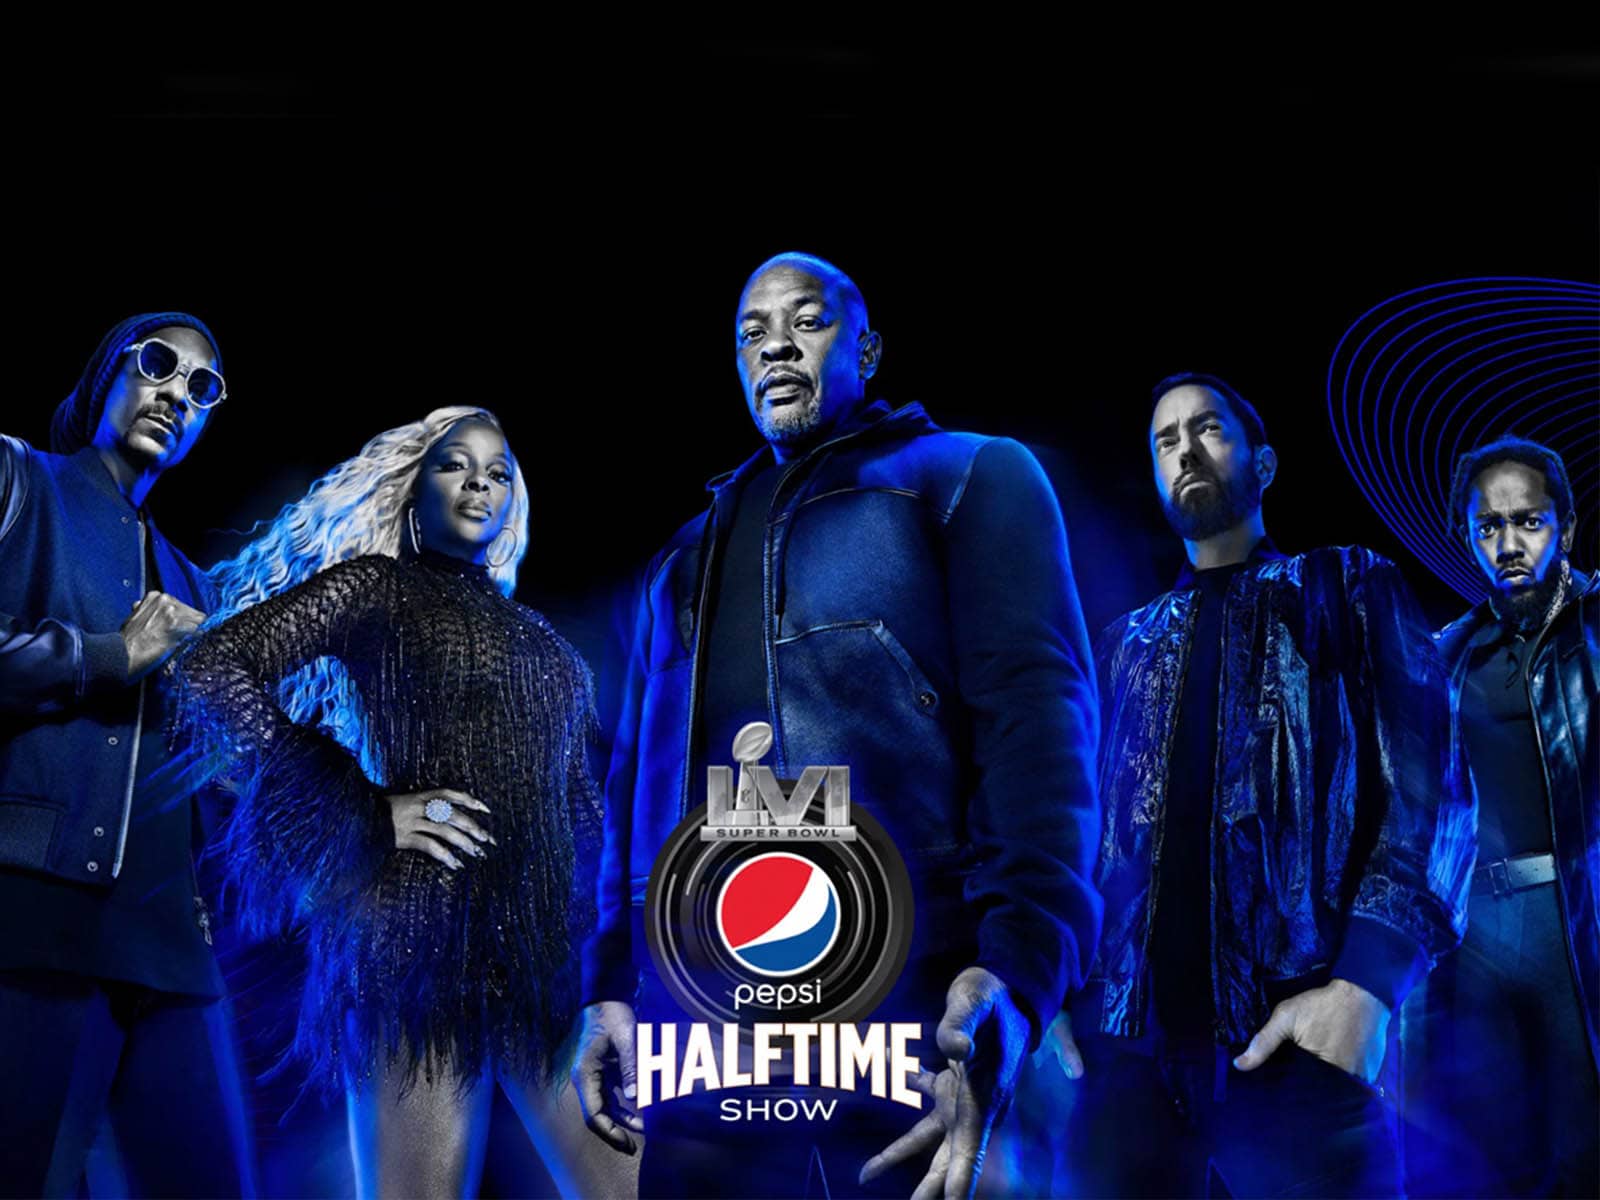 Pepsi breaks off 10-year relationship with Super Bowl